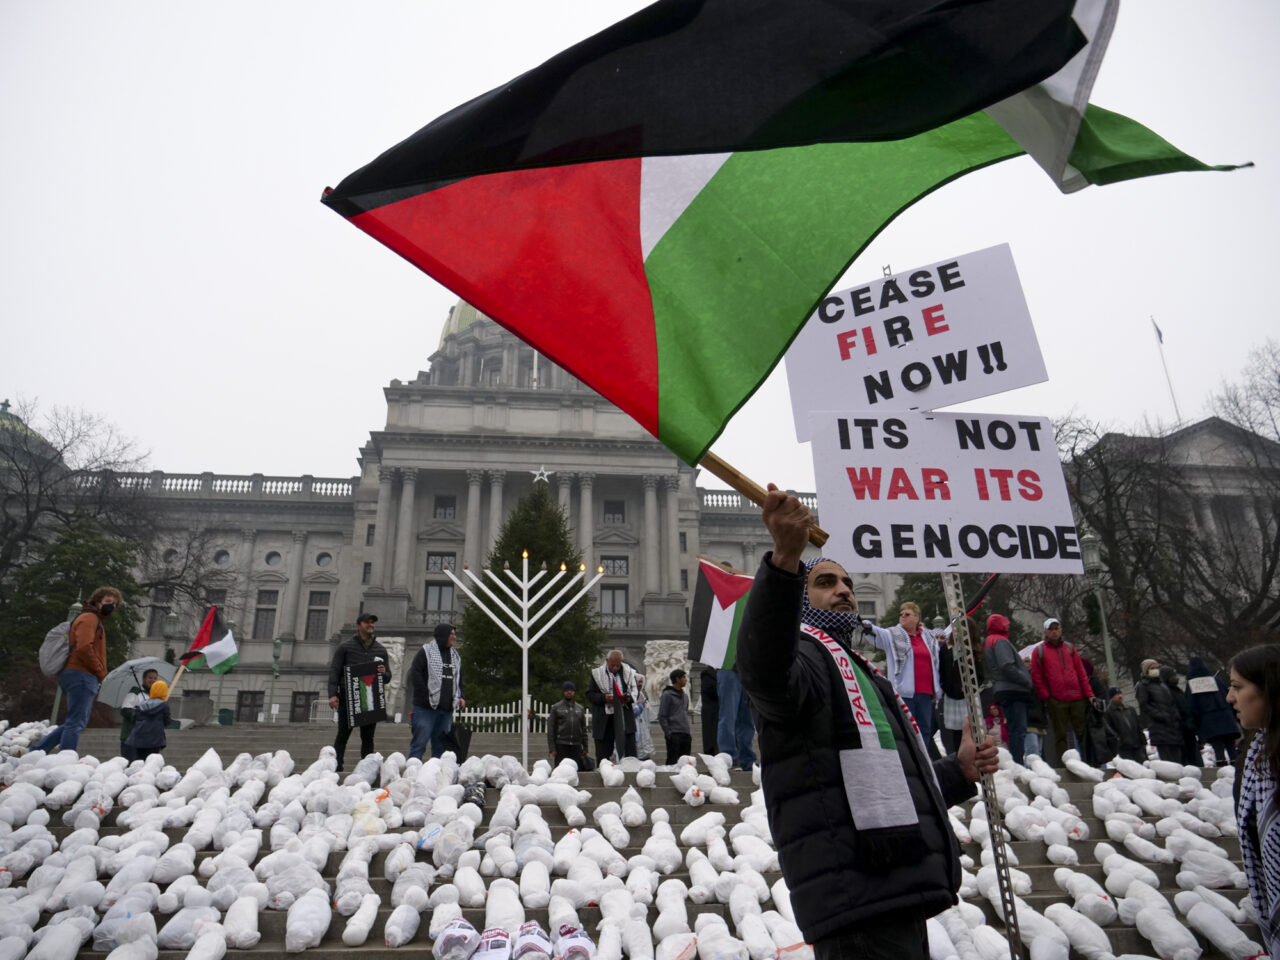 Mike Shaw demonstrates as hundreds gathered at the state capitol building and marched to the governor's residence in Harrisburg on Dec. 10, 2023 calling for a permanent cease fire in the war between Israel and Palestine. Jeremy Long - WITF